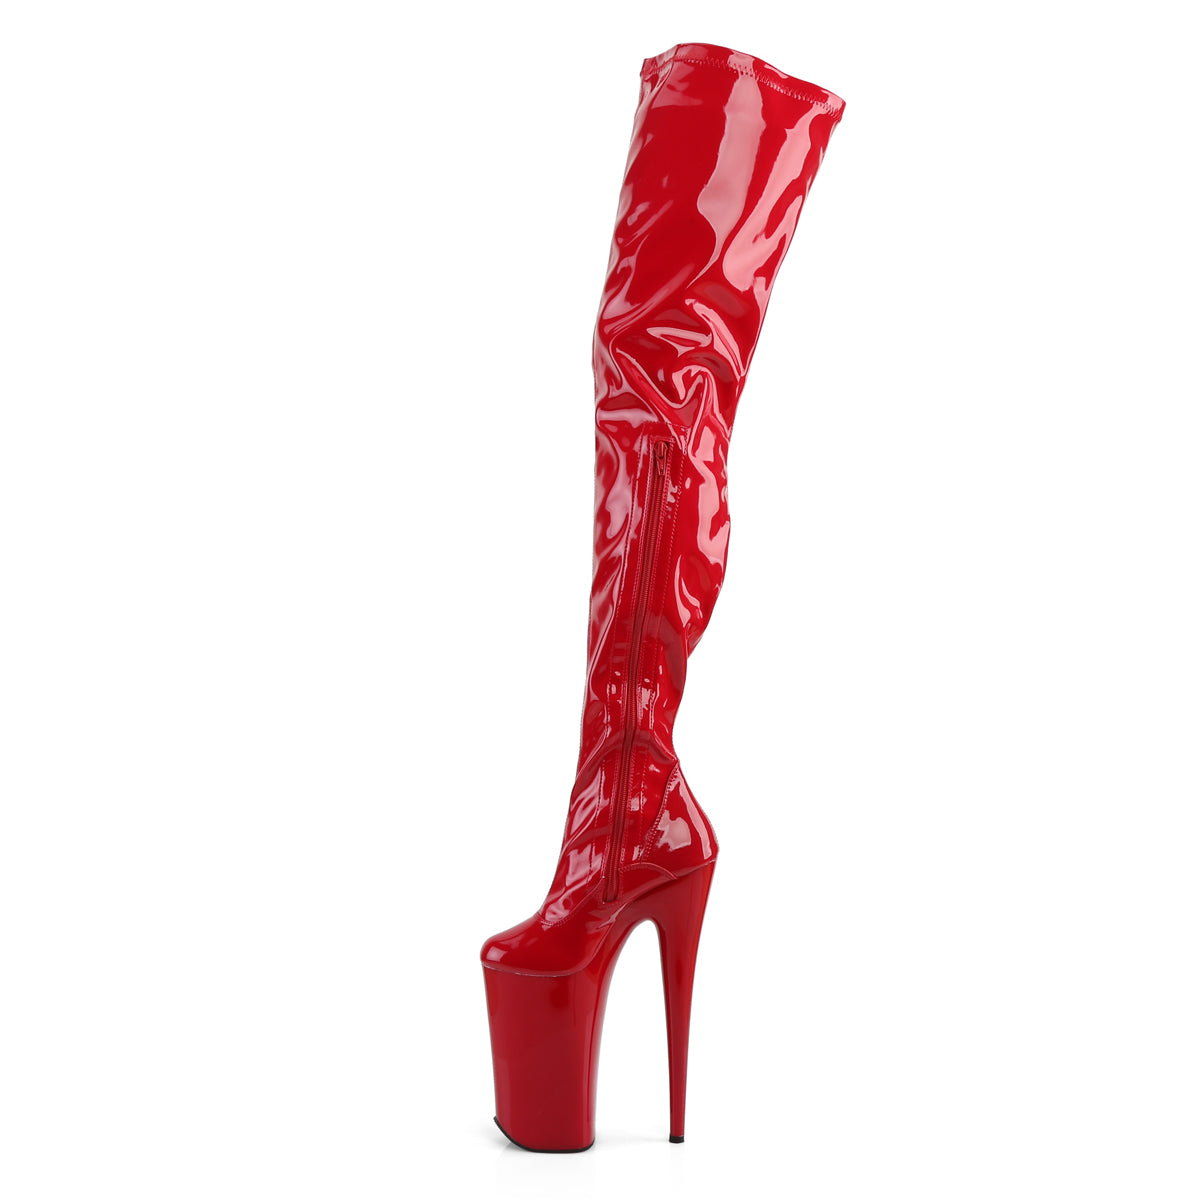 BEYOND-4000 Pleasers Sexy 10" Heel Red Pole Dancing Platform-Pleaser- Sexy Shoes Pole Dance Heels